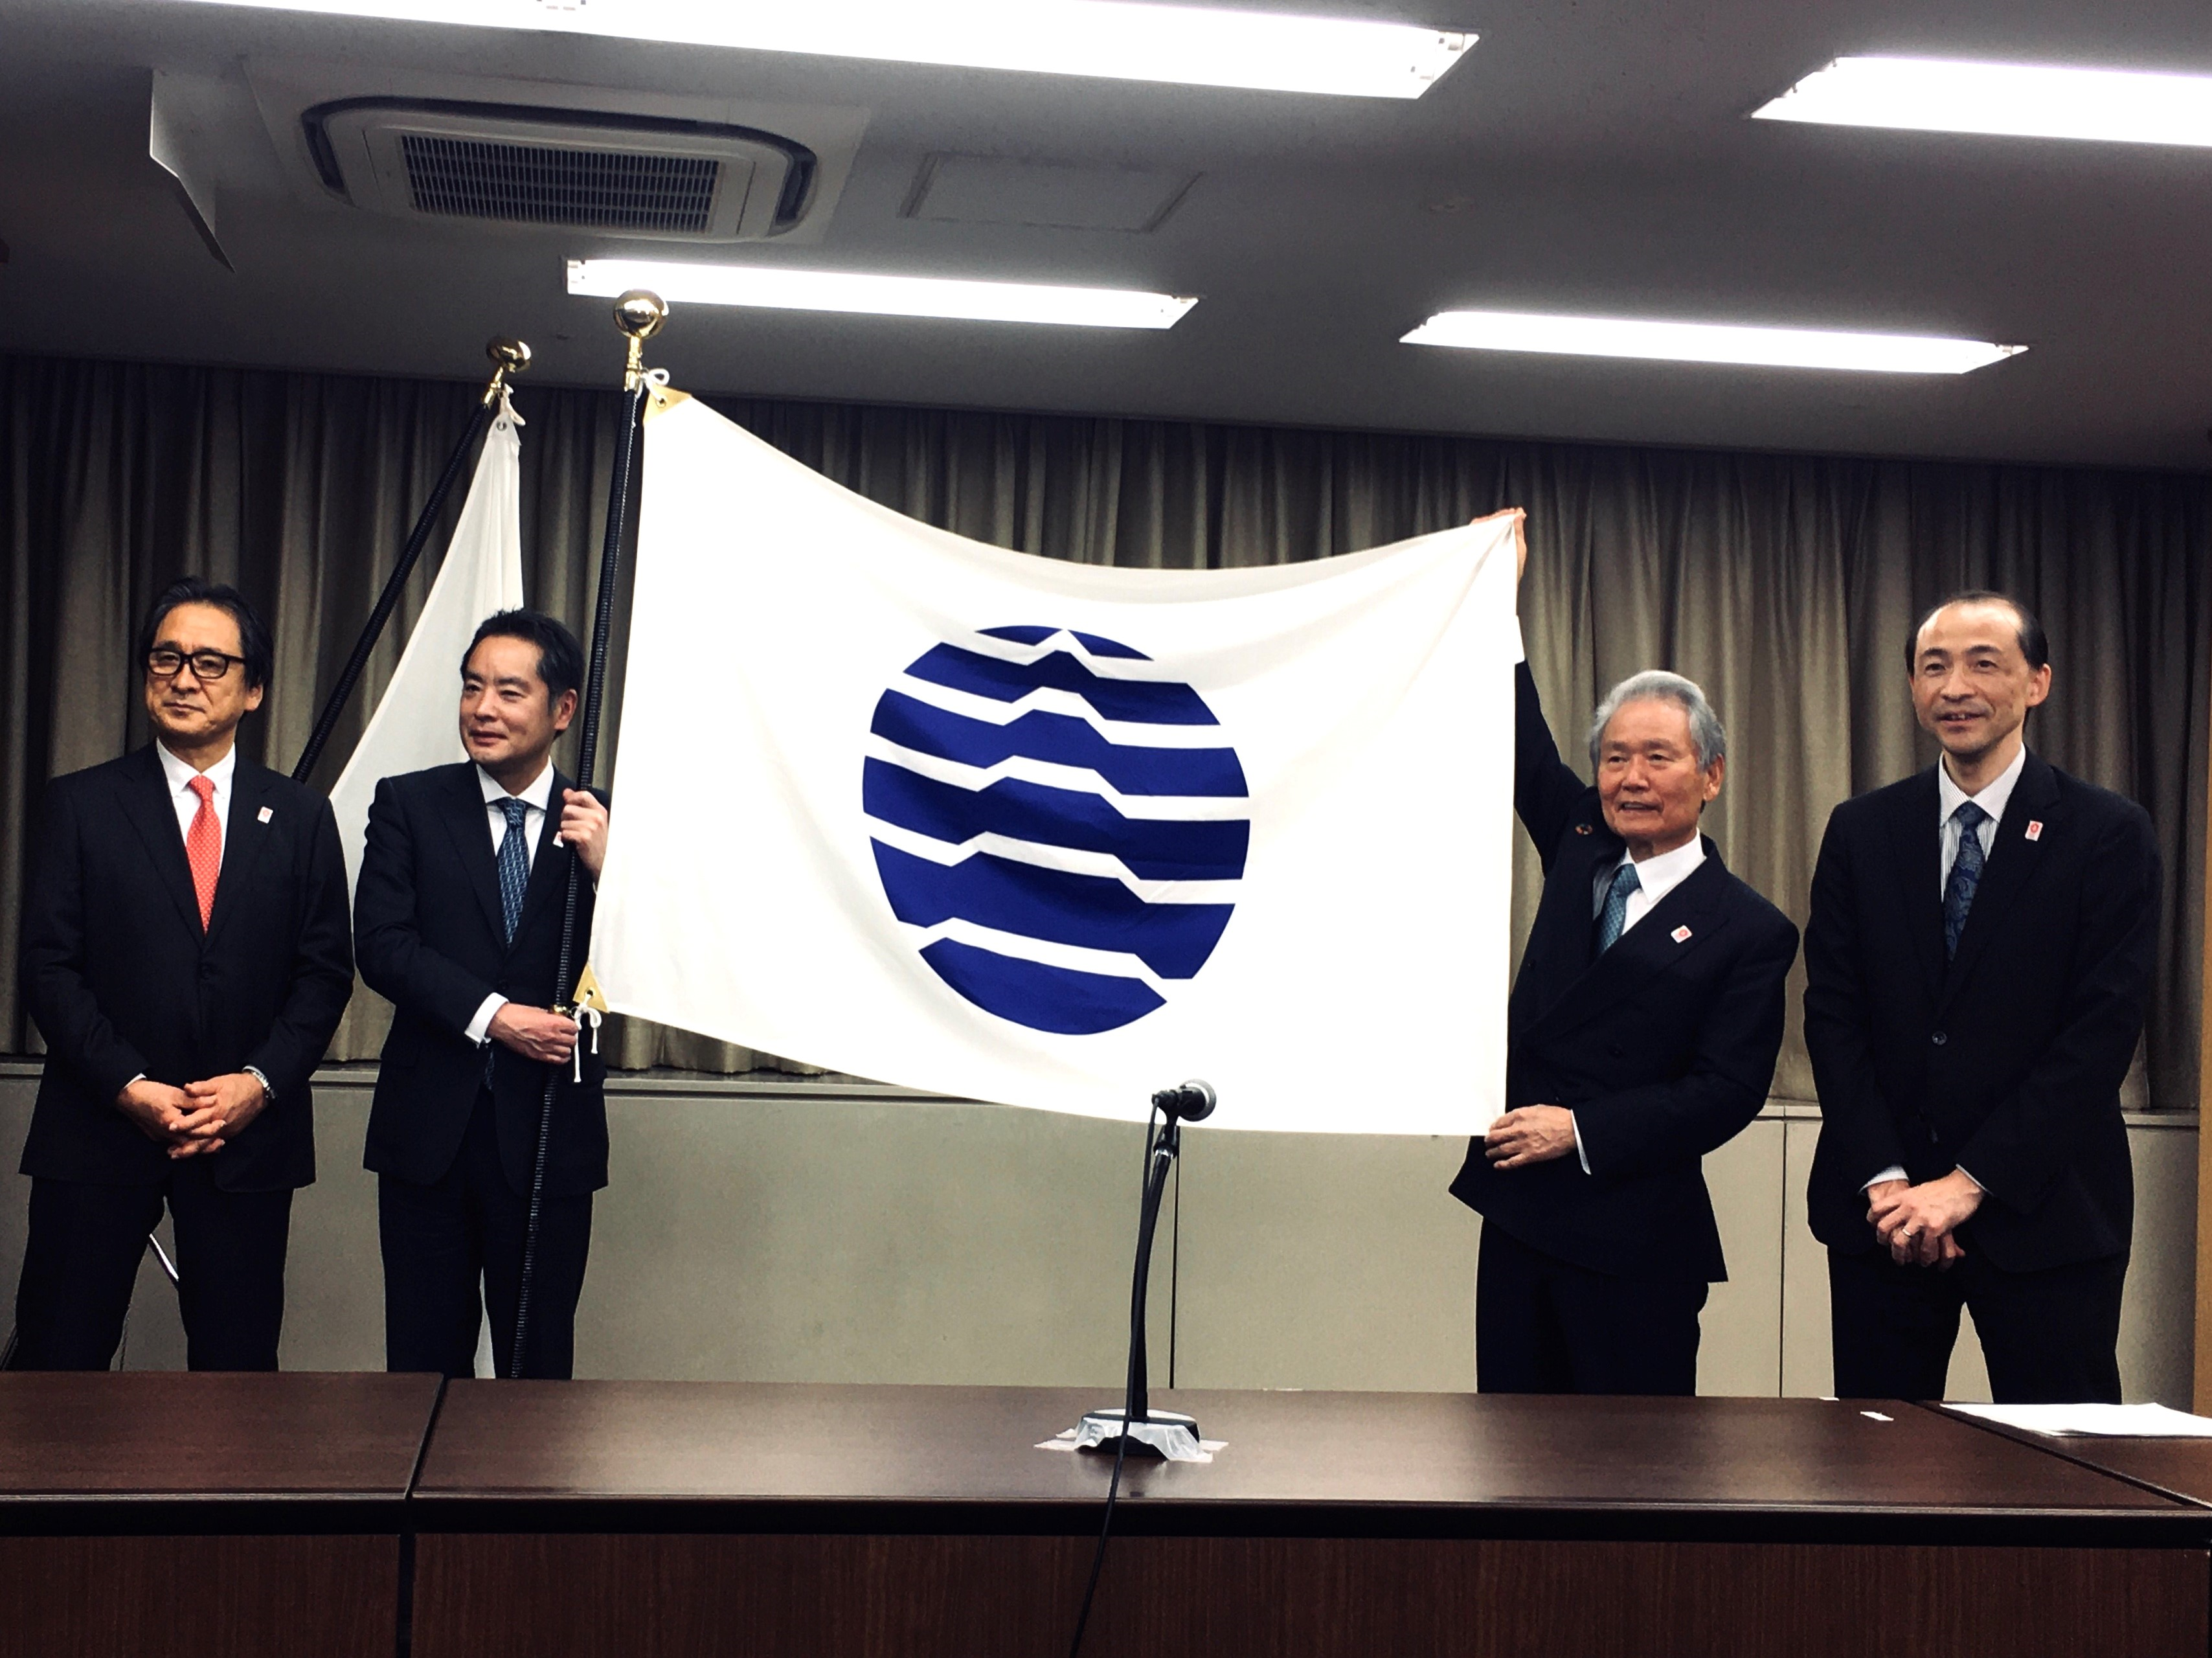 Minister Inoue received BIE Flag. (Second from the left)